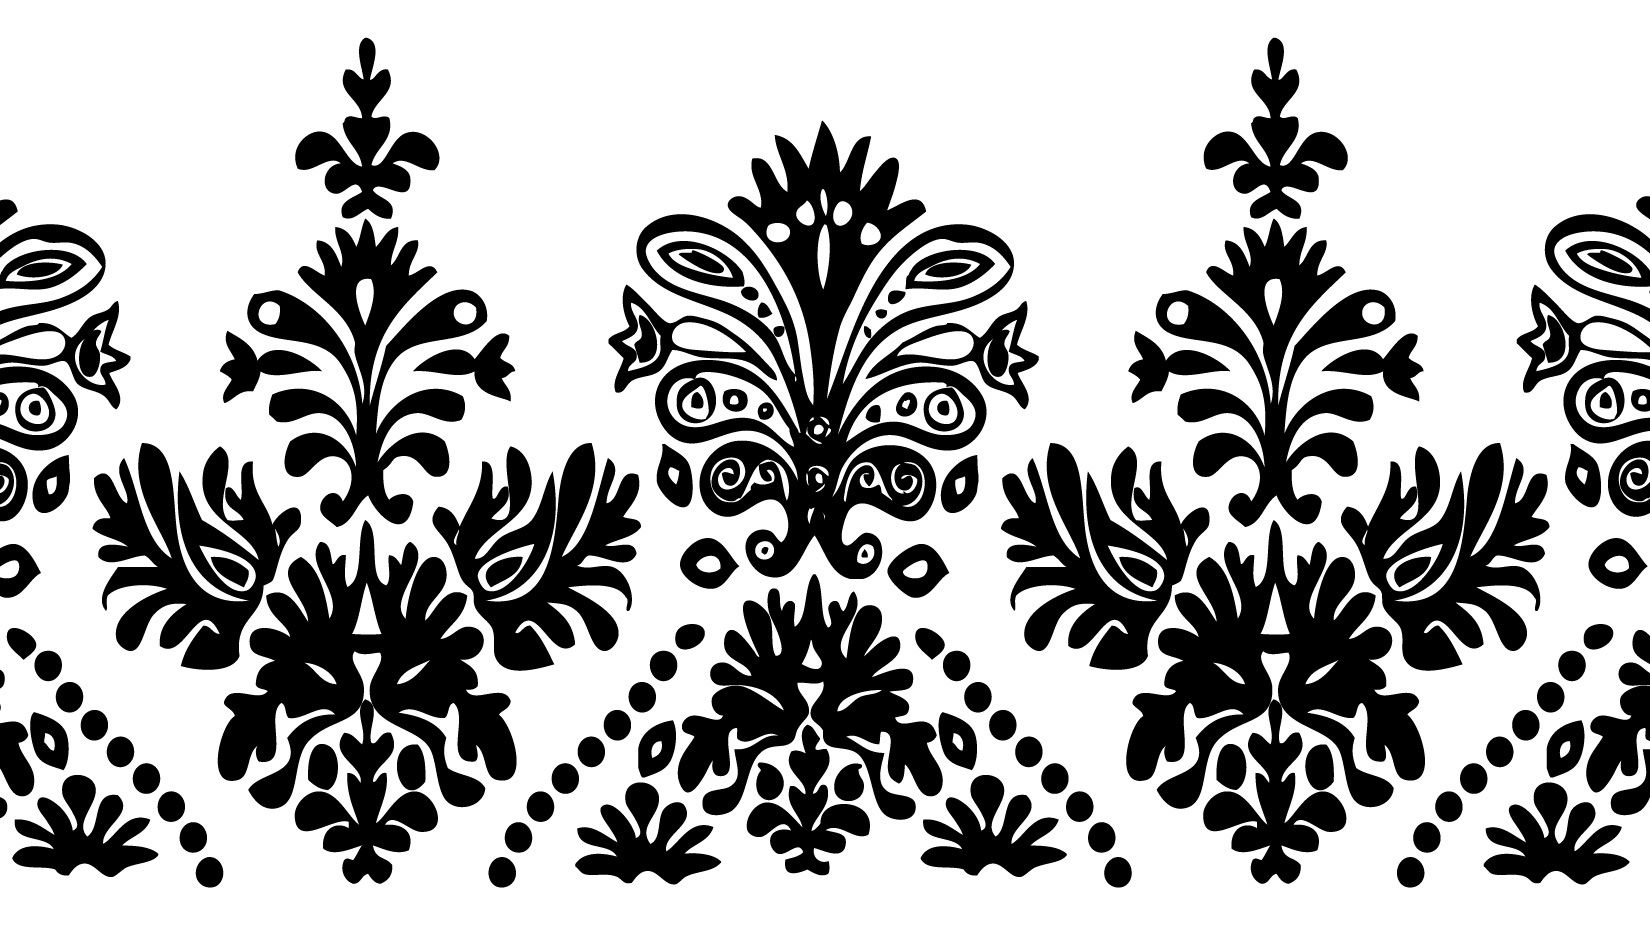 Free Printable Stencils For Painting | Stencils Designs Free - Free Printable Stencil Designs